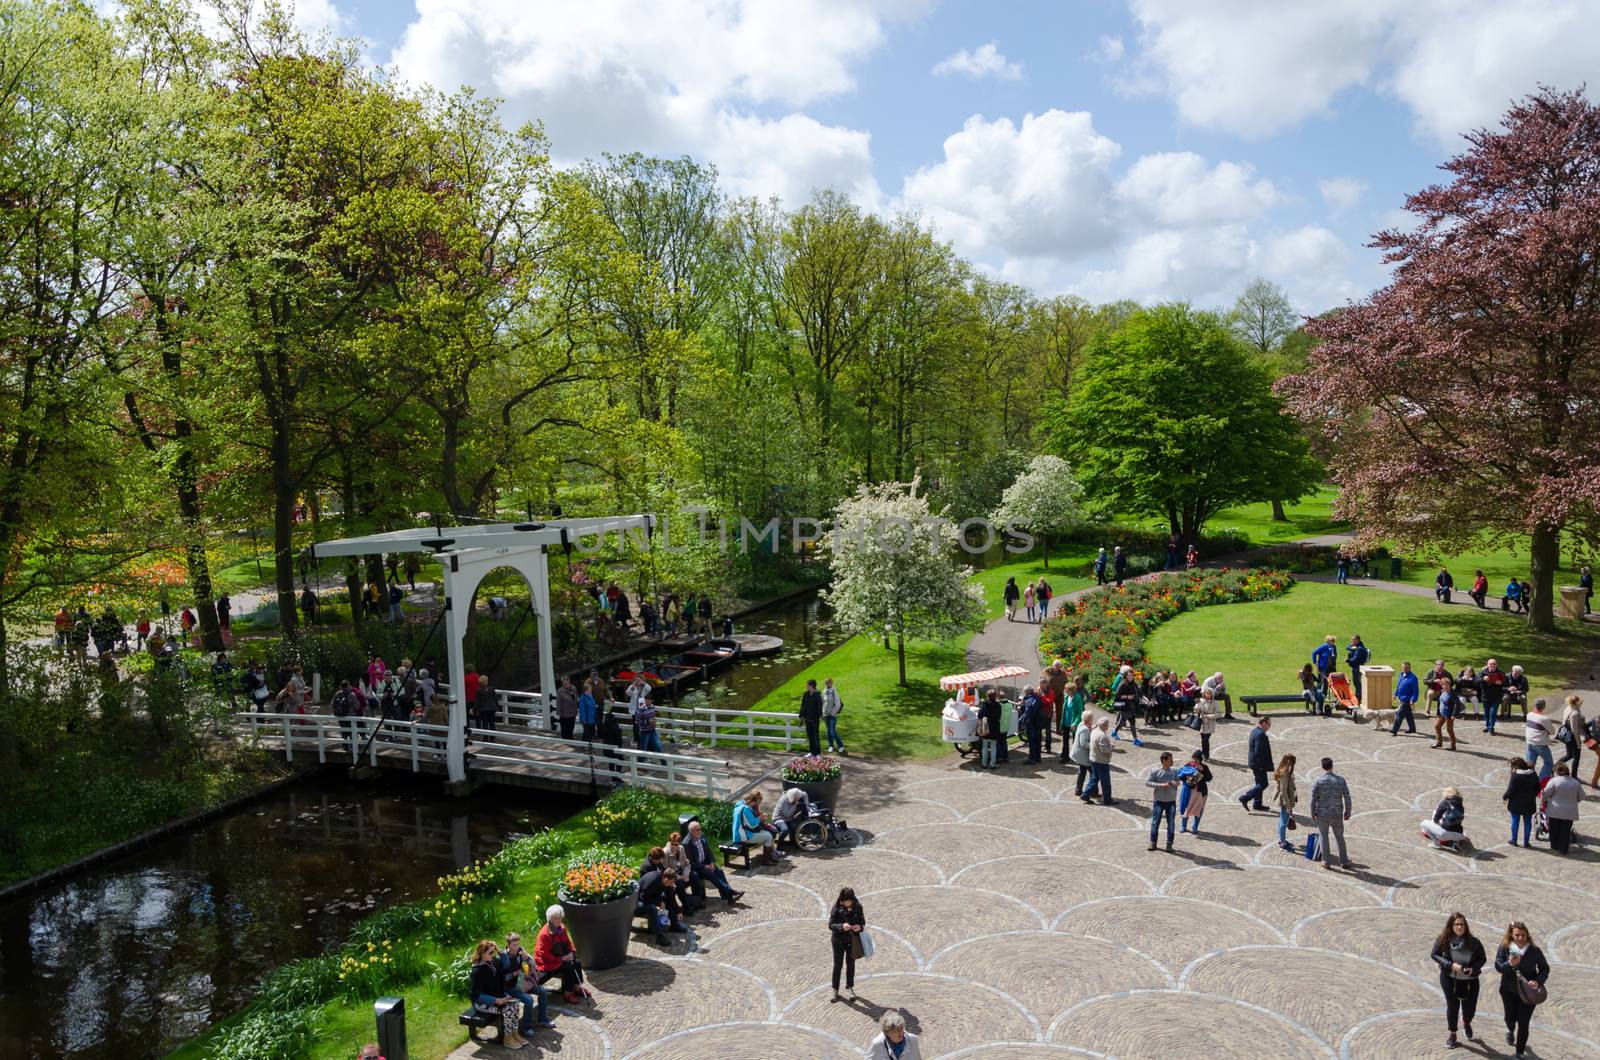 Lisse, The Netherlands - May 7, 2015: Tourists visit famous garden keukenhof by siraanamwong